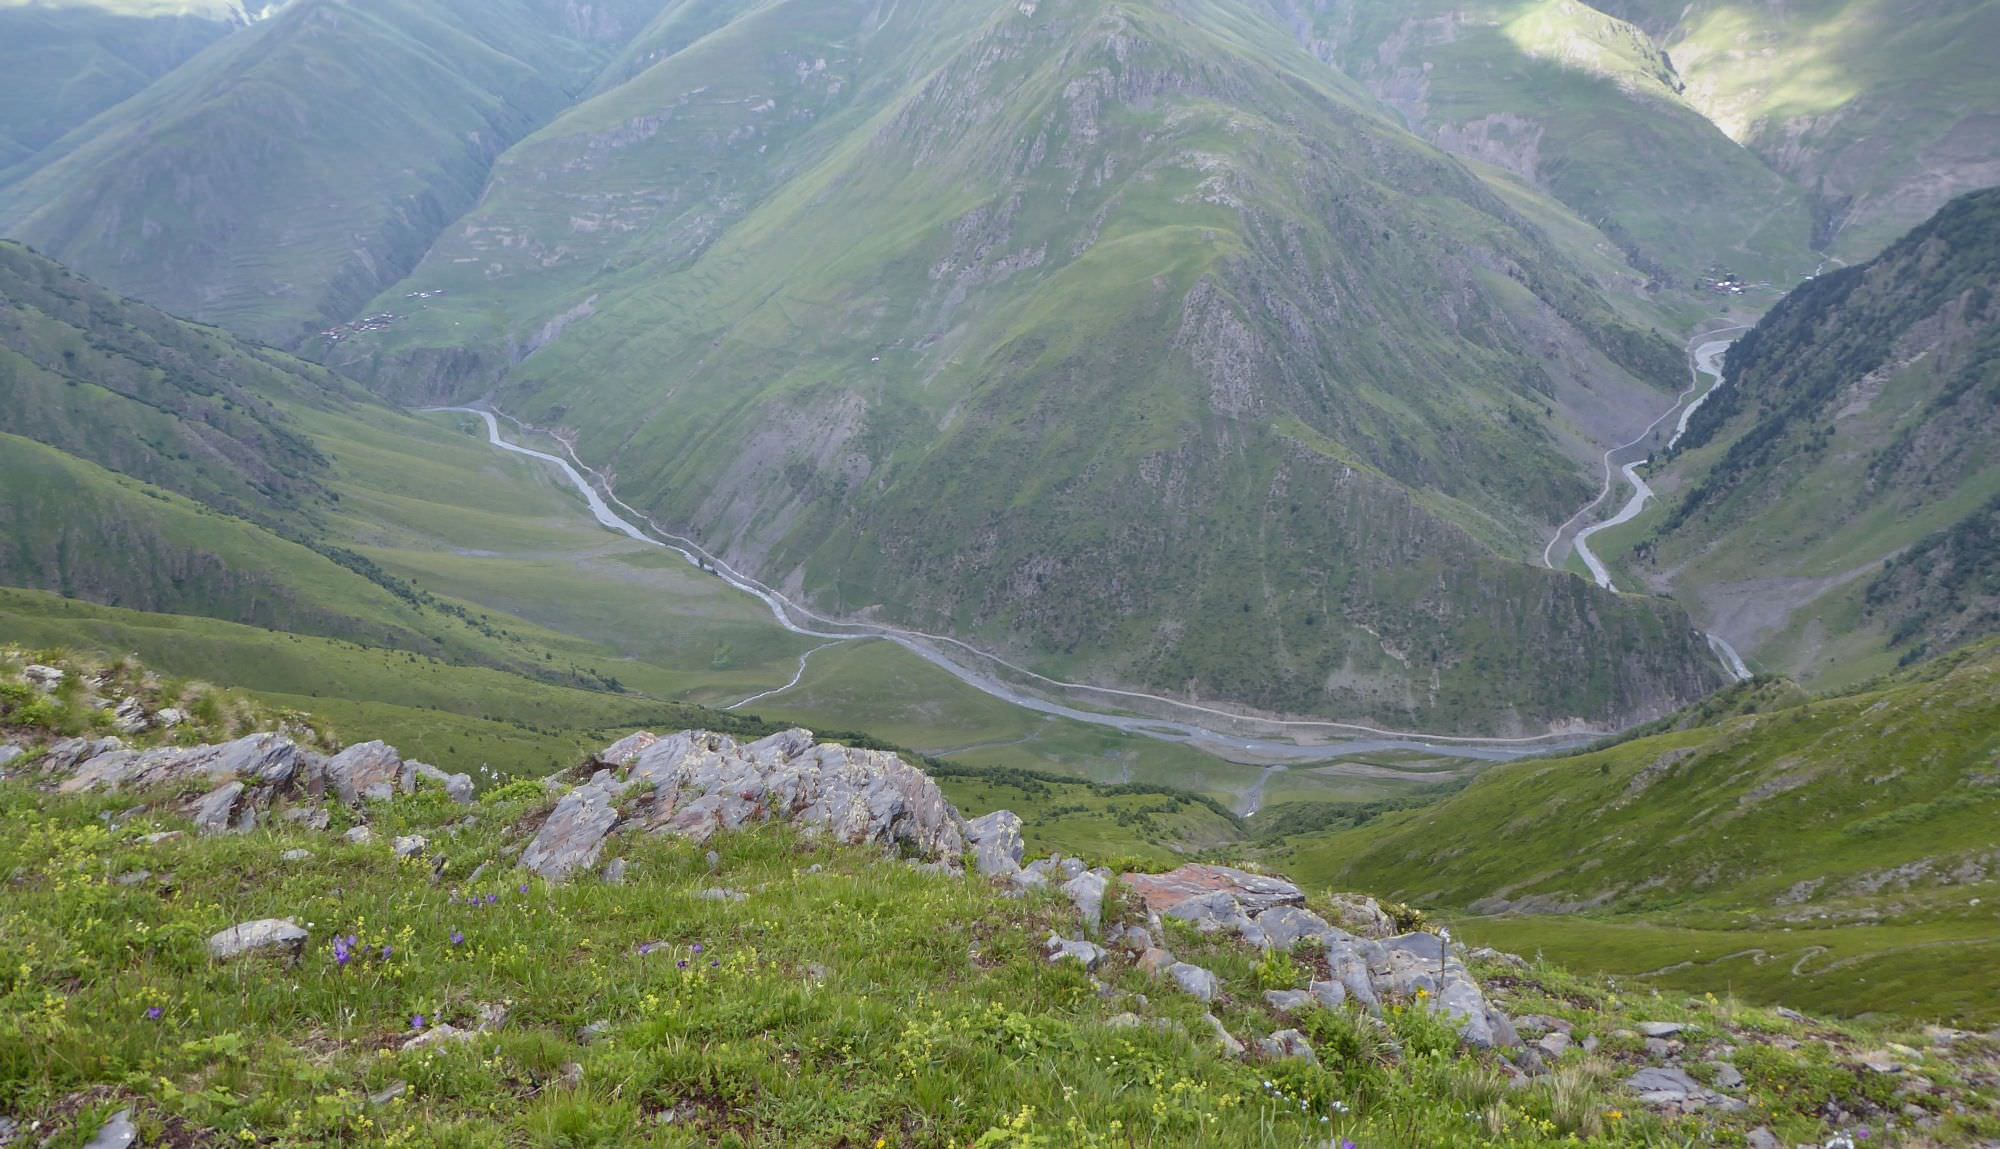 Aerial view from the pass - descent trail on the right, Parsma village on the left